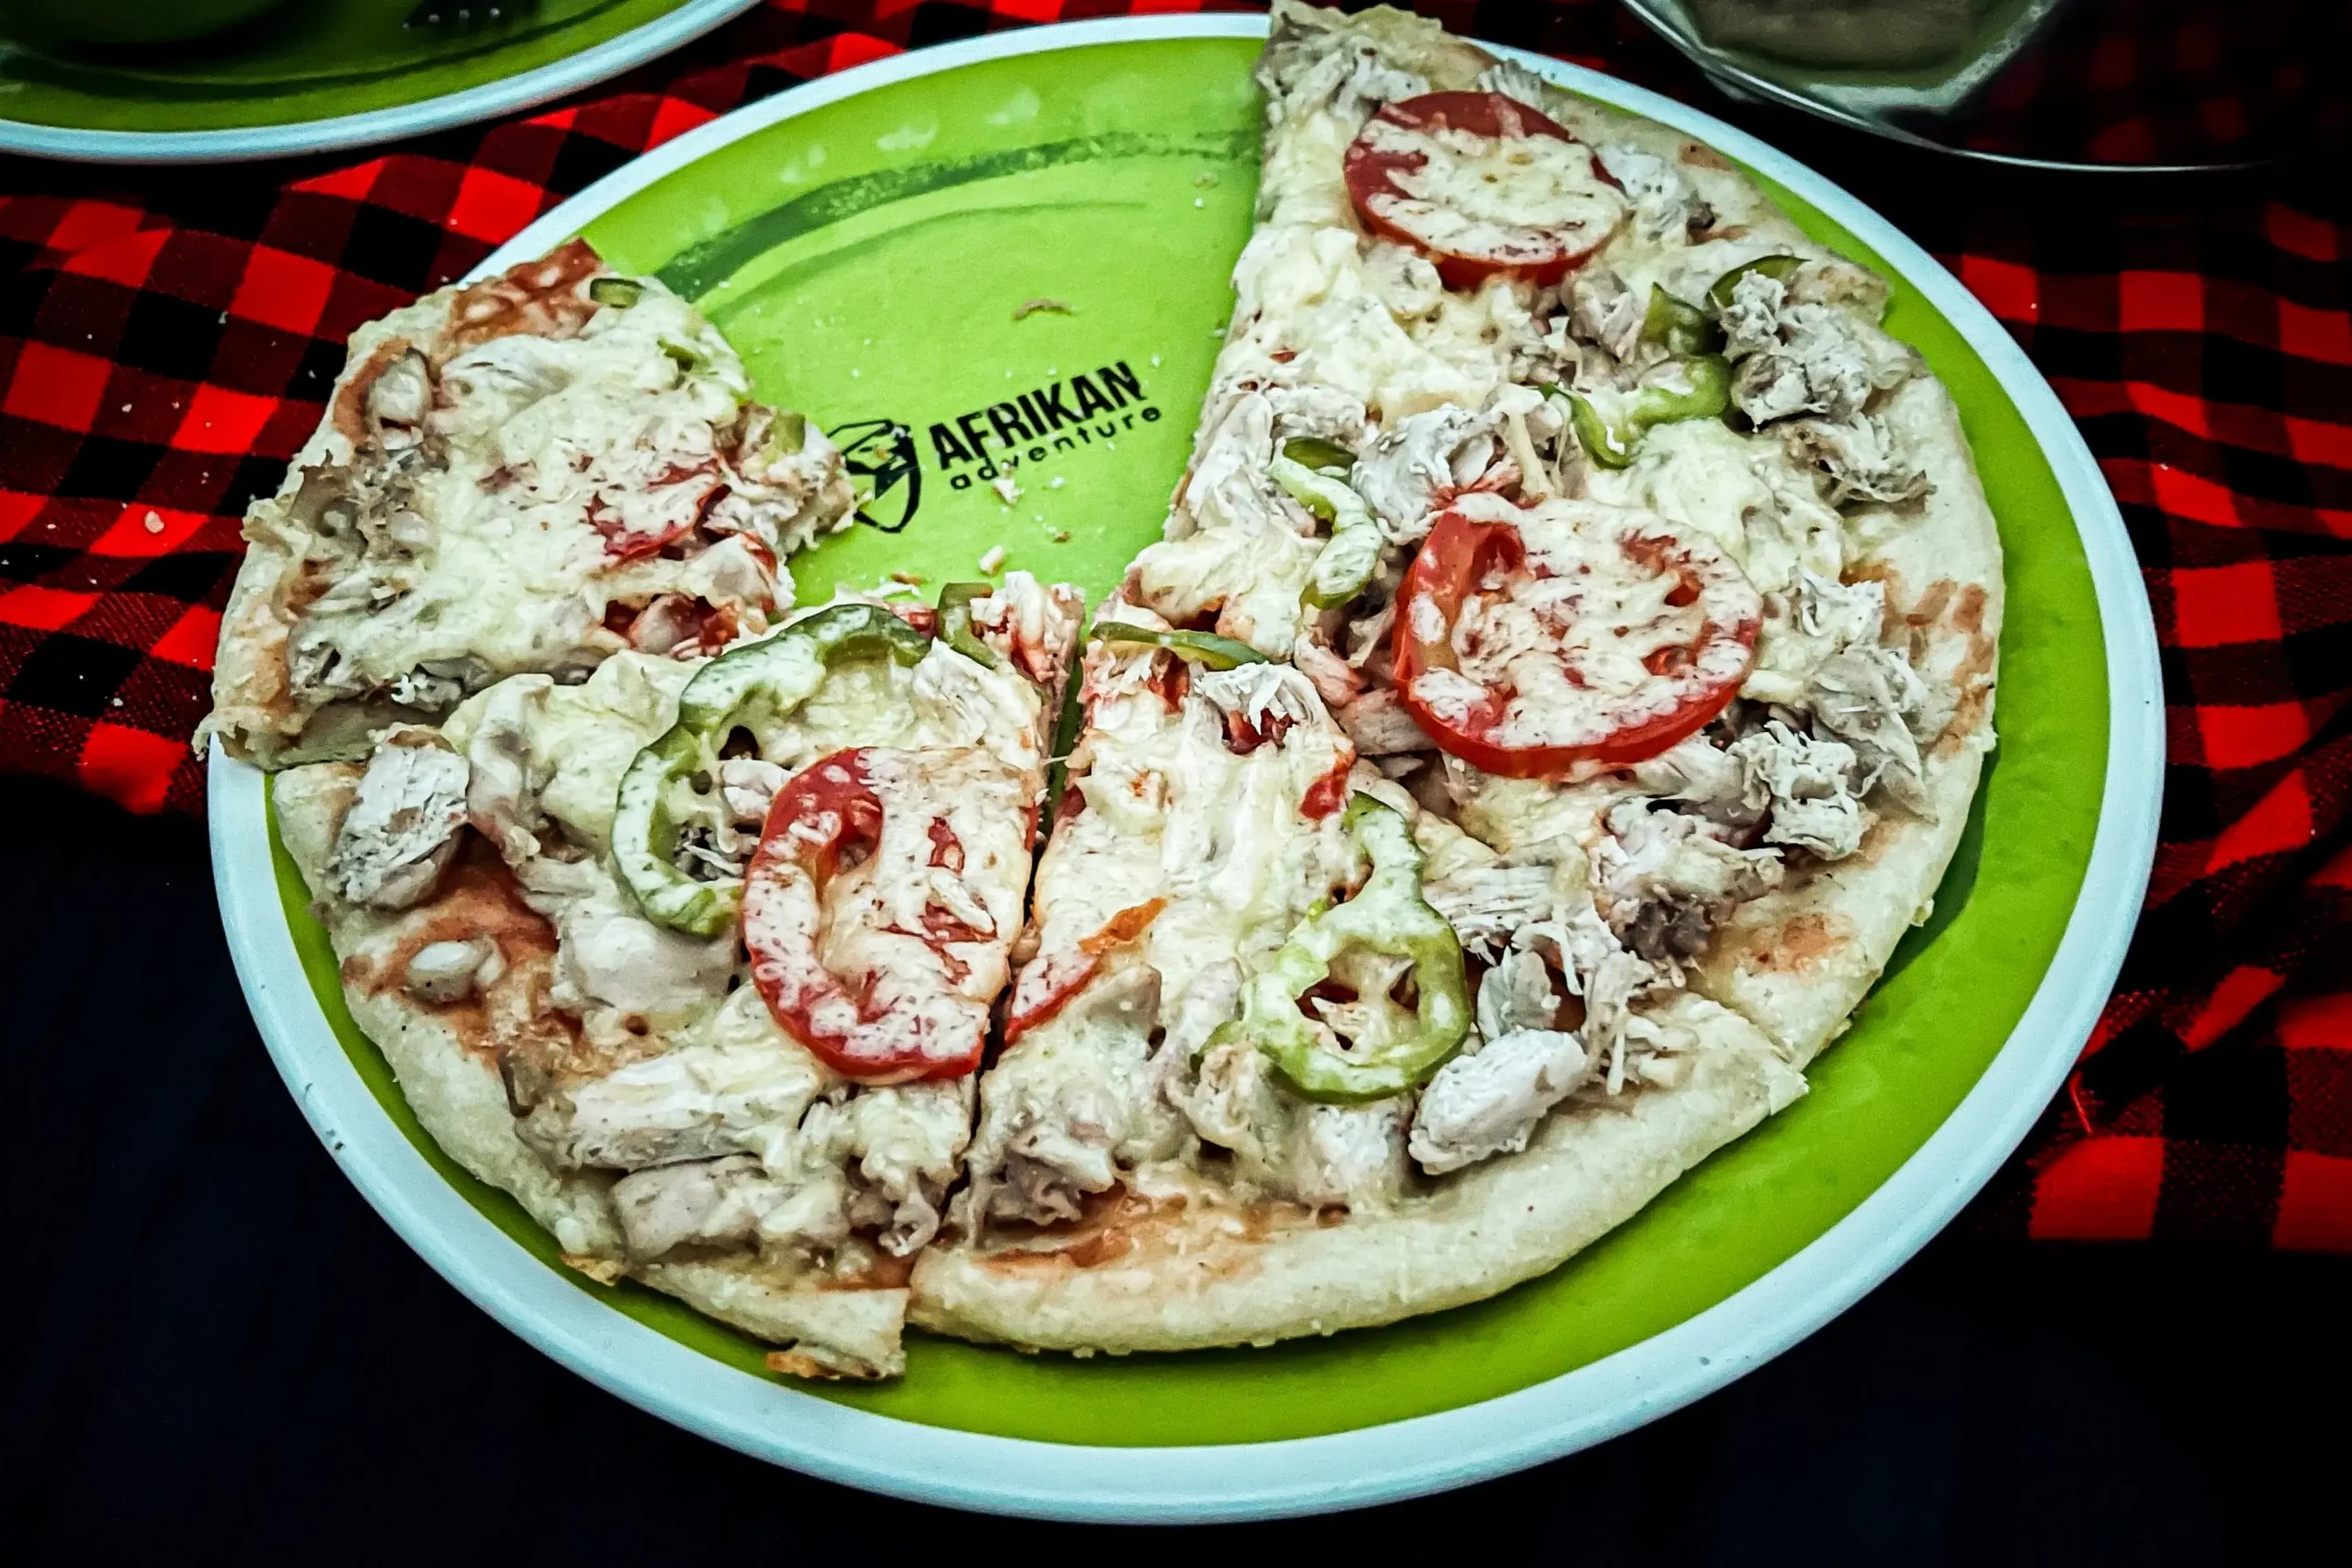 A plate full of sliced pizza provided as food to our travelers in between treks and safari